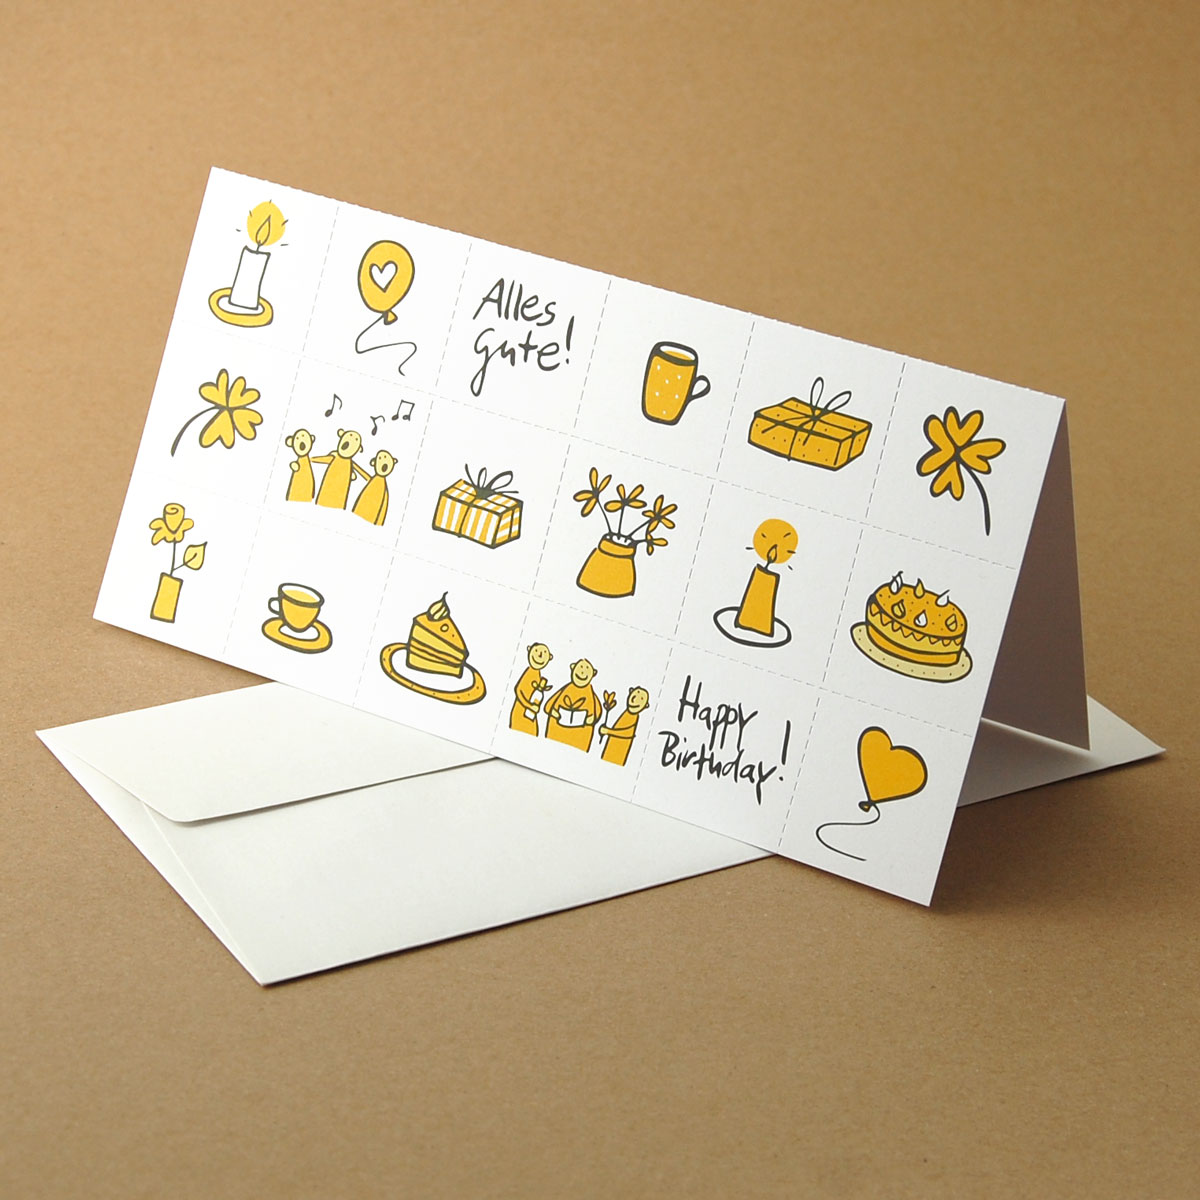 Memo, great design printed - recycling birthday cards with recycled envelopes